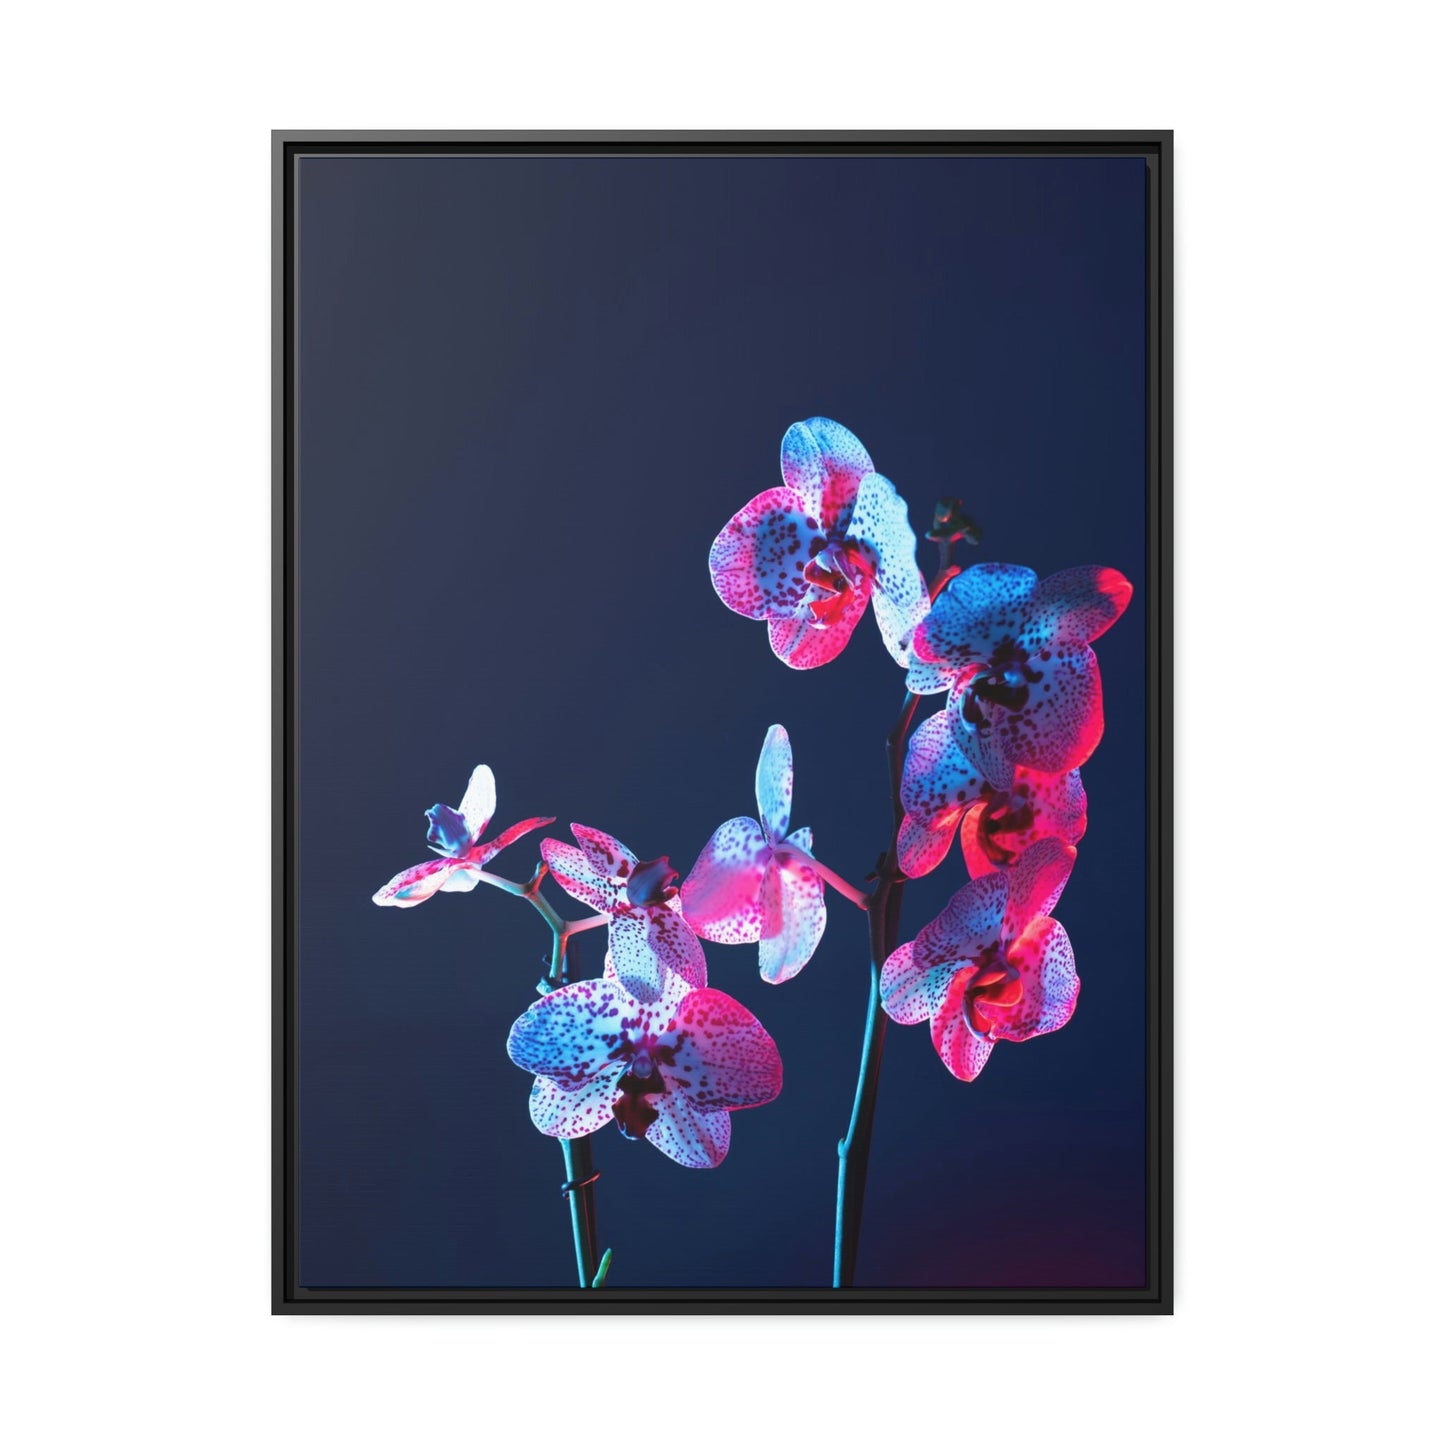 Abstract Energy: Framed Poster on Canvas with Vibrant Colors for Artistic Bedroom